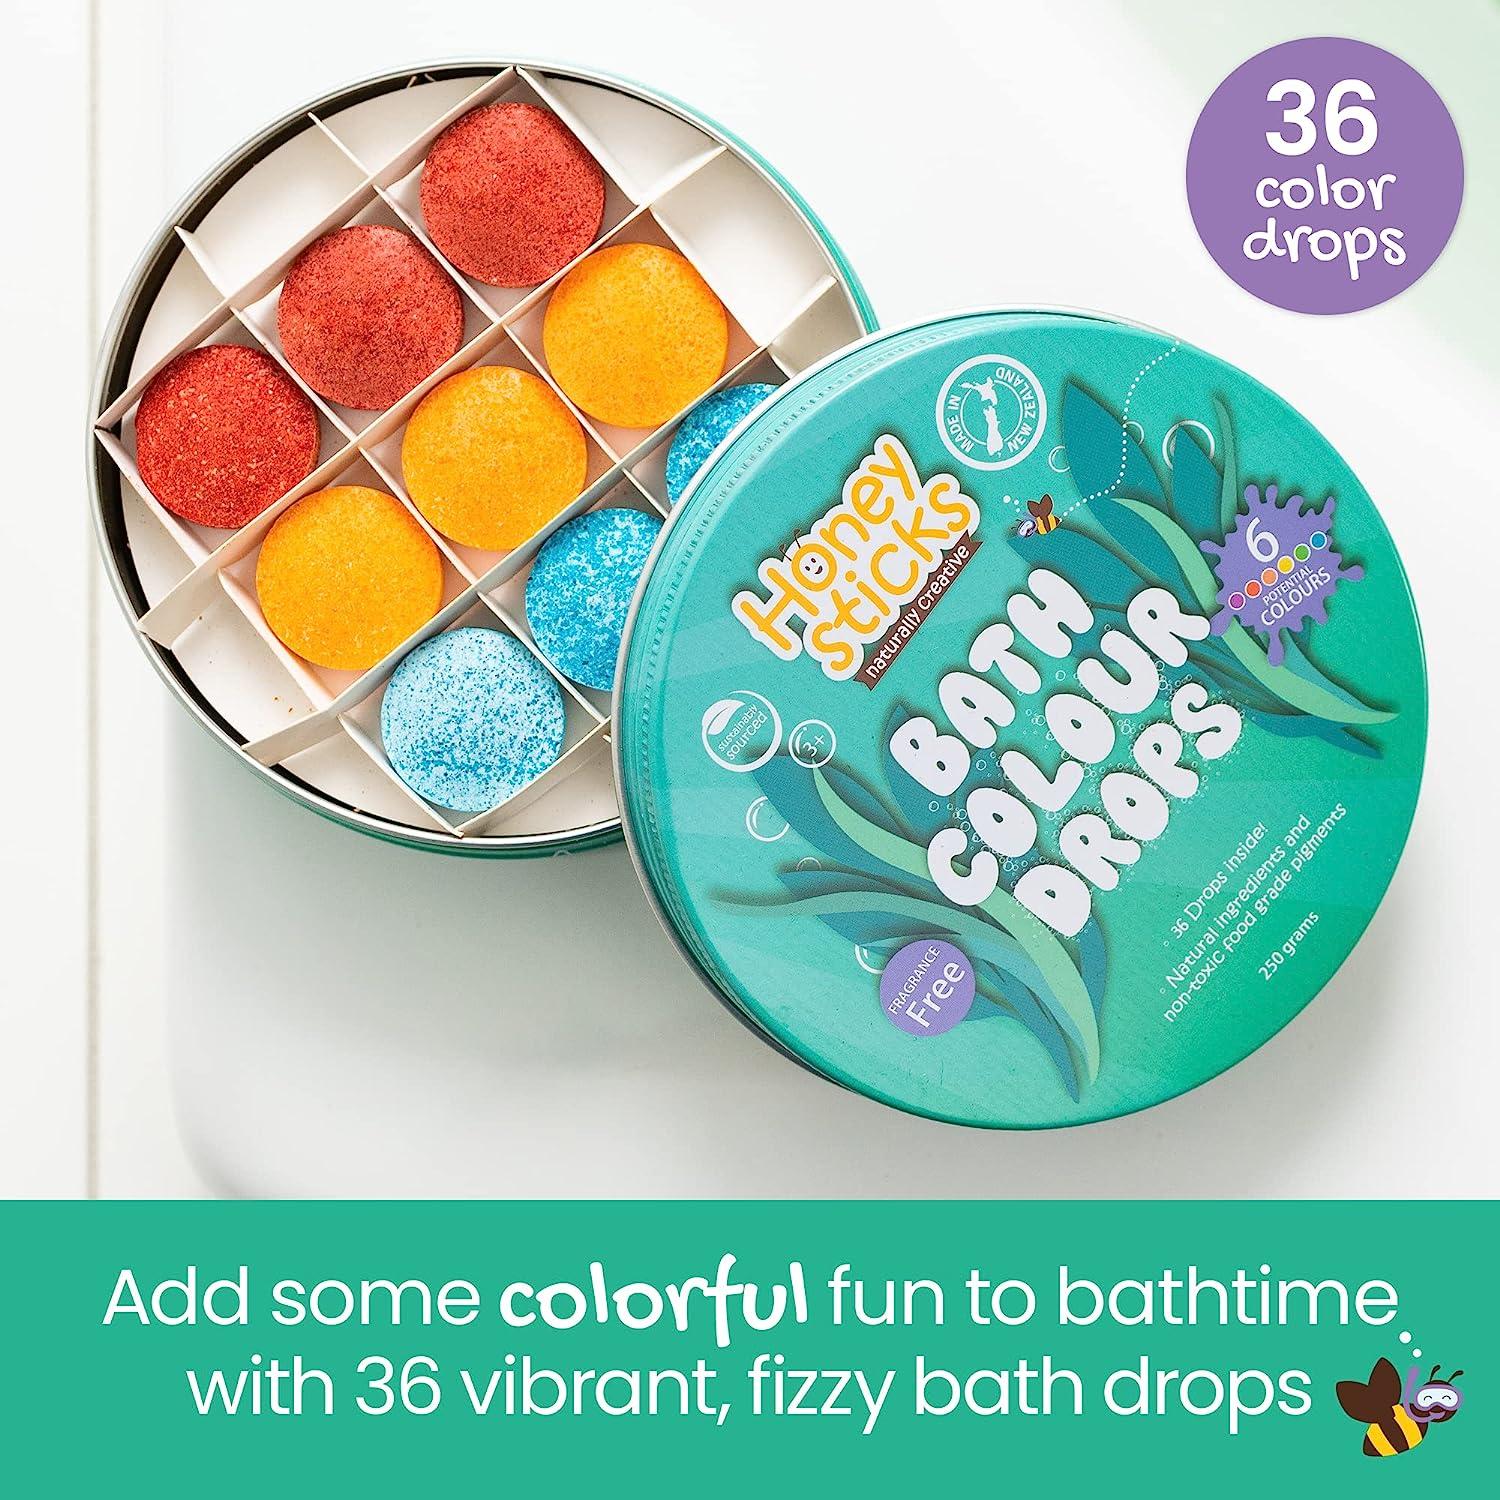 Honeysticks Bath Color Tablets for Kids - Non Toxic Bathtub Color Drops  Made with Natural and Food Grade Ingredients - Fragrance Free - Fizzy,  Brightly Colored Bathtime Fun, Great Gift Idea - 36 Drops